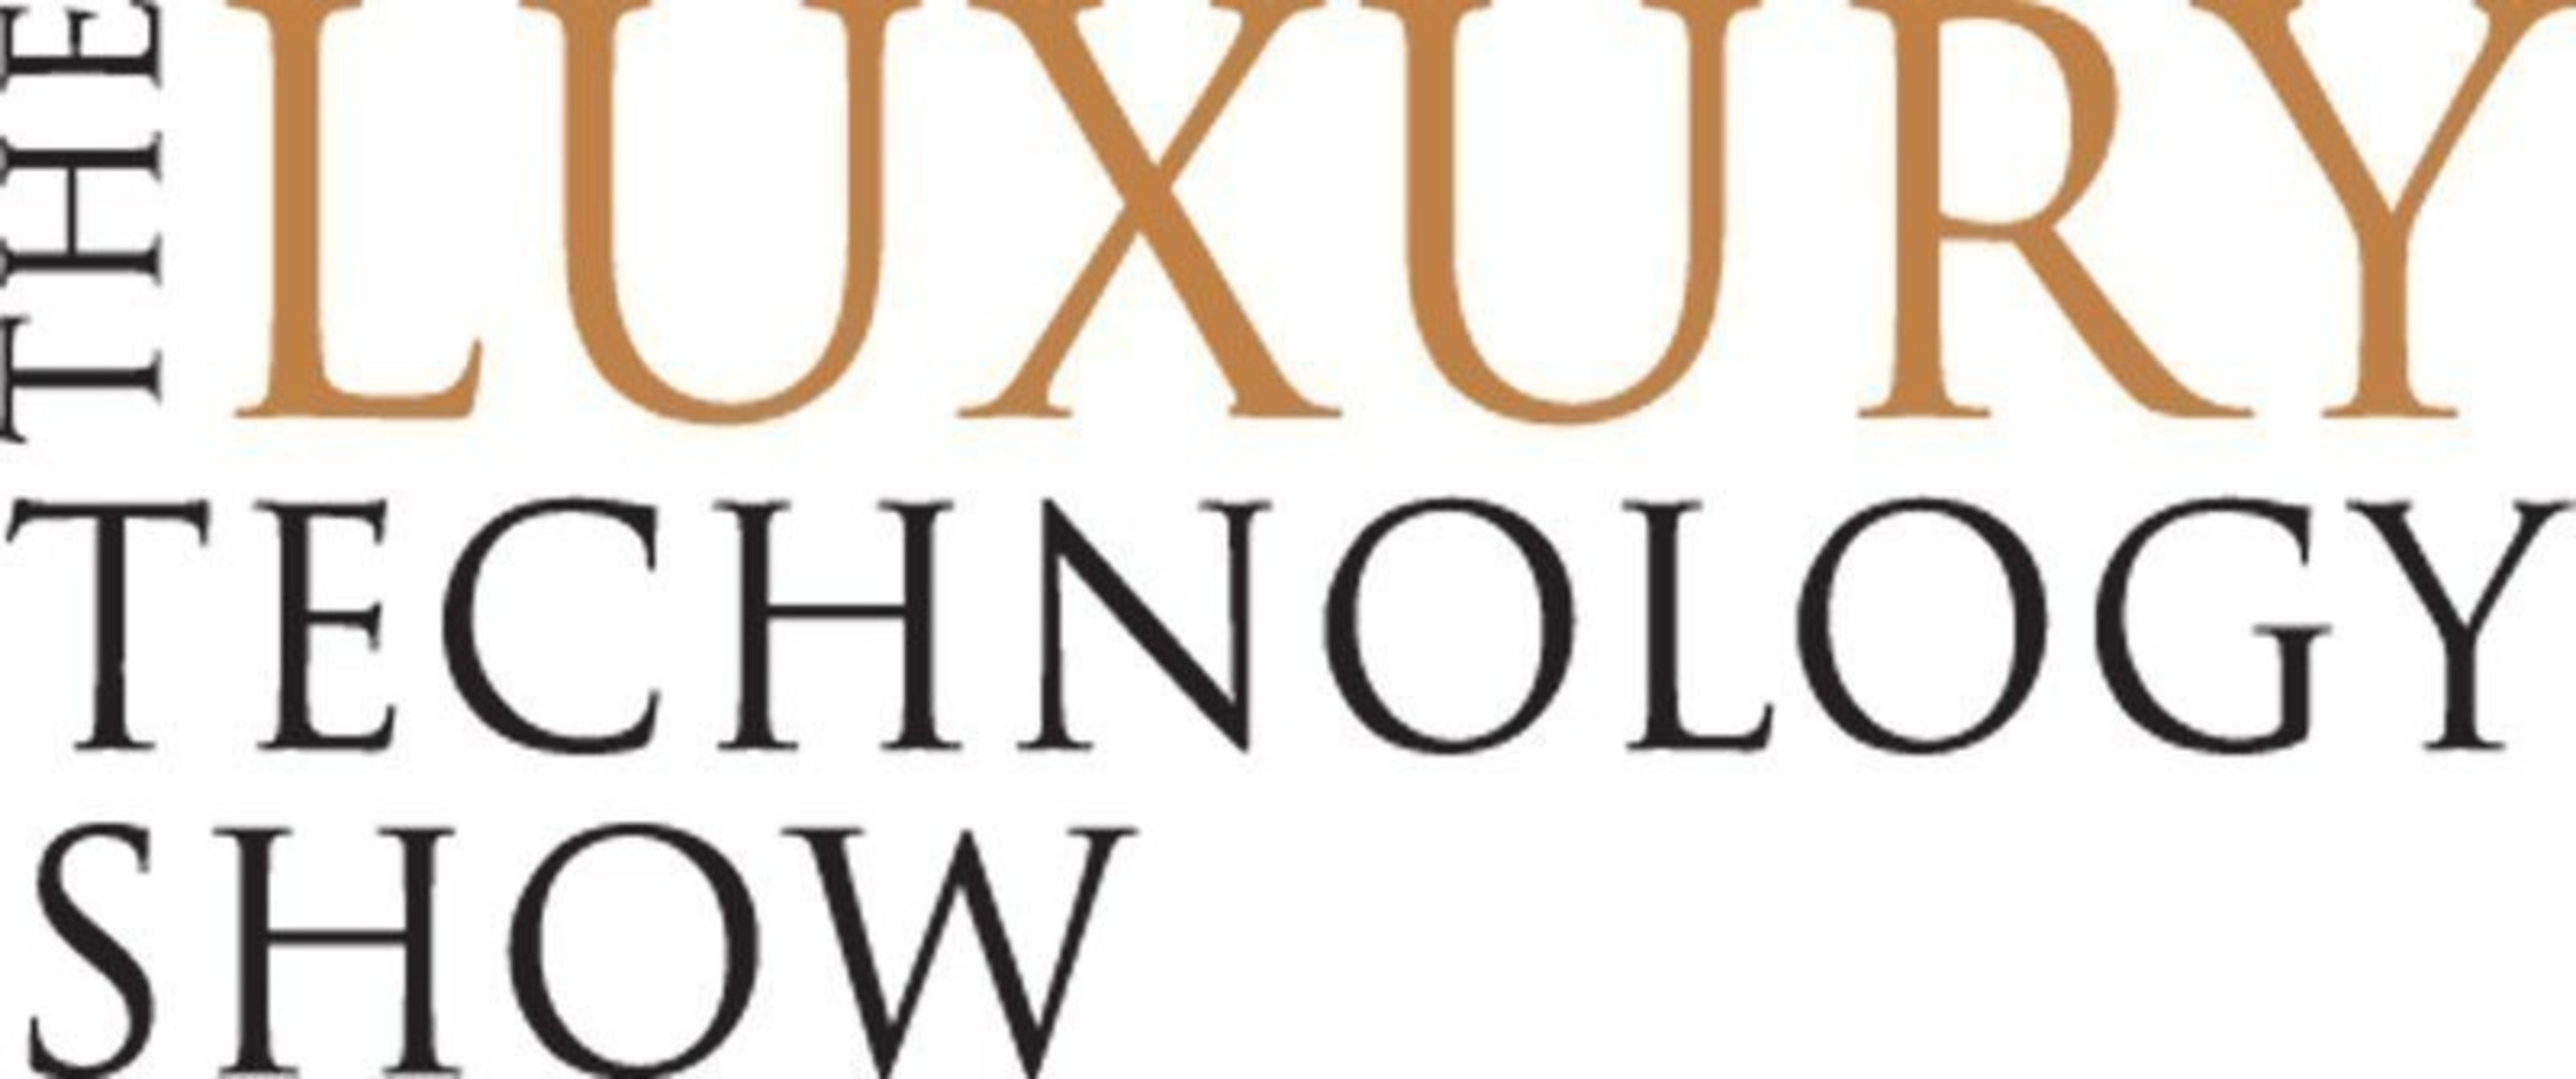 RAND Luxury announces their impressive lineup for the Luxury Technology Show at the Metropolitan Pavilion in New York, NY on March 12, 2015